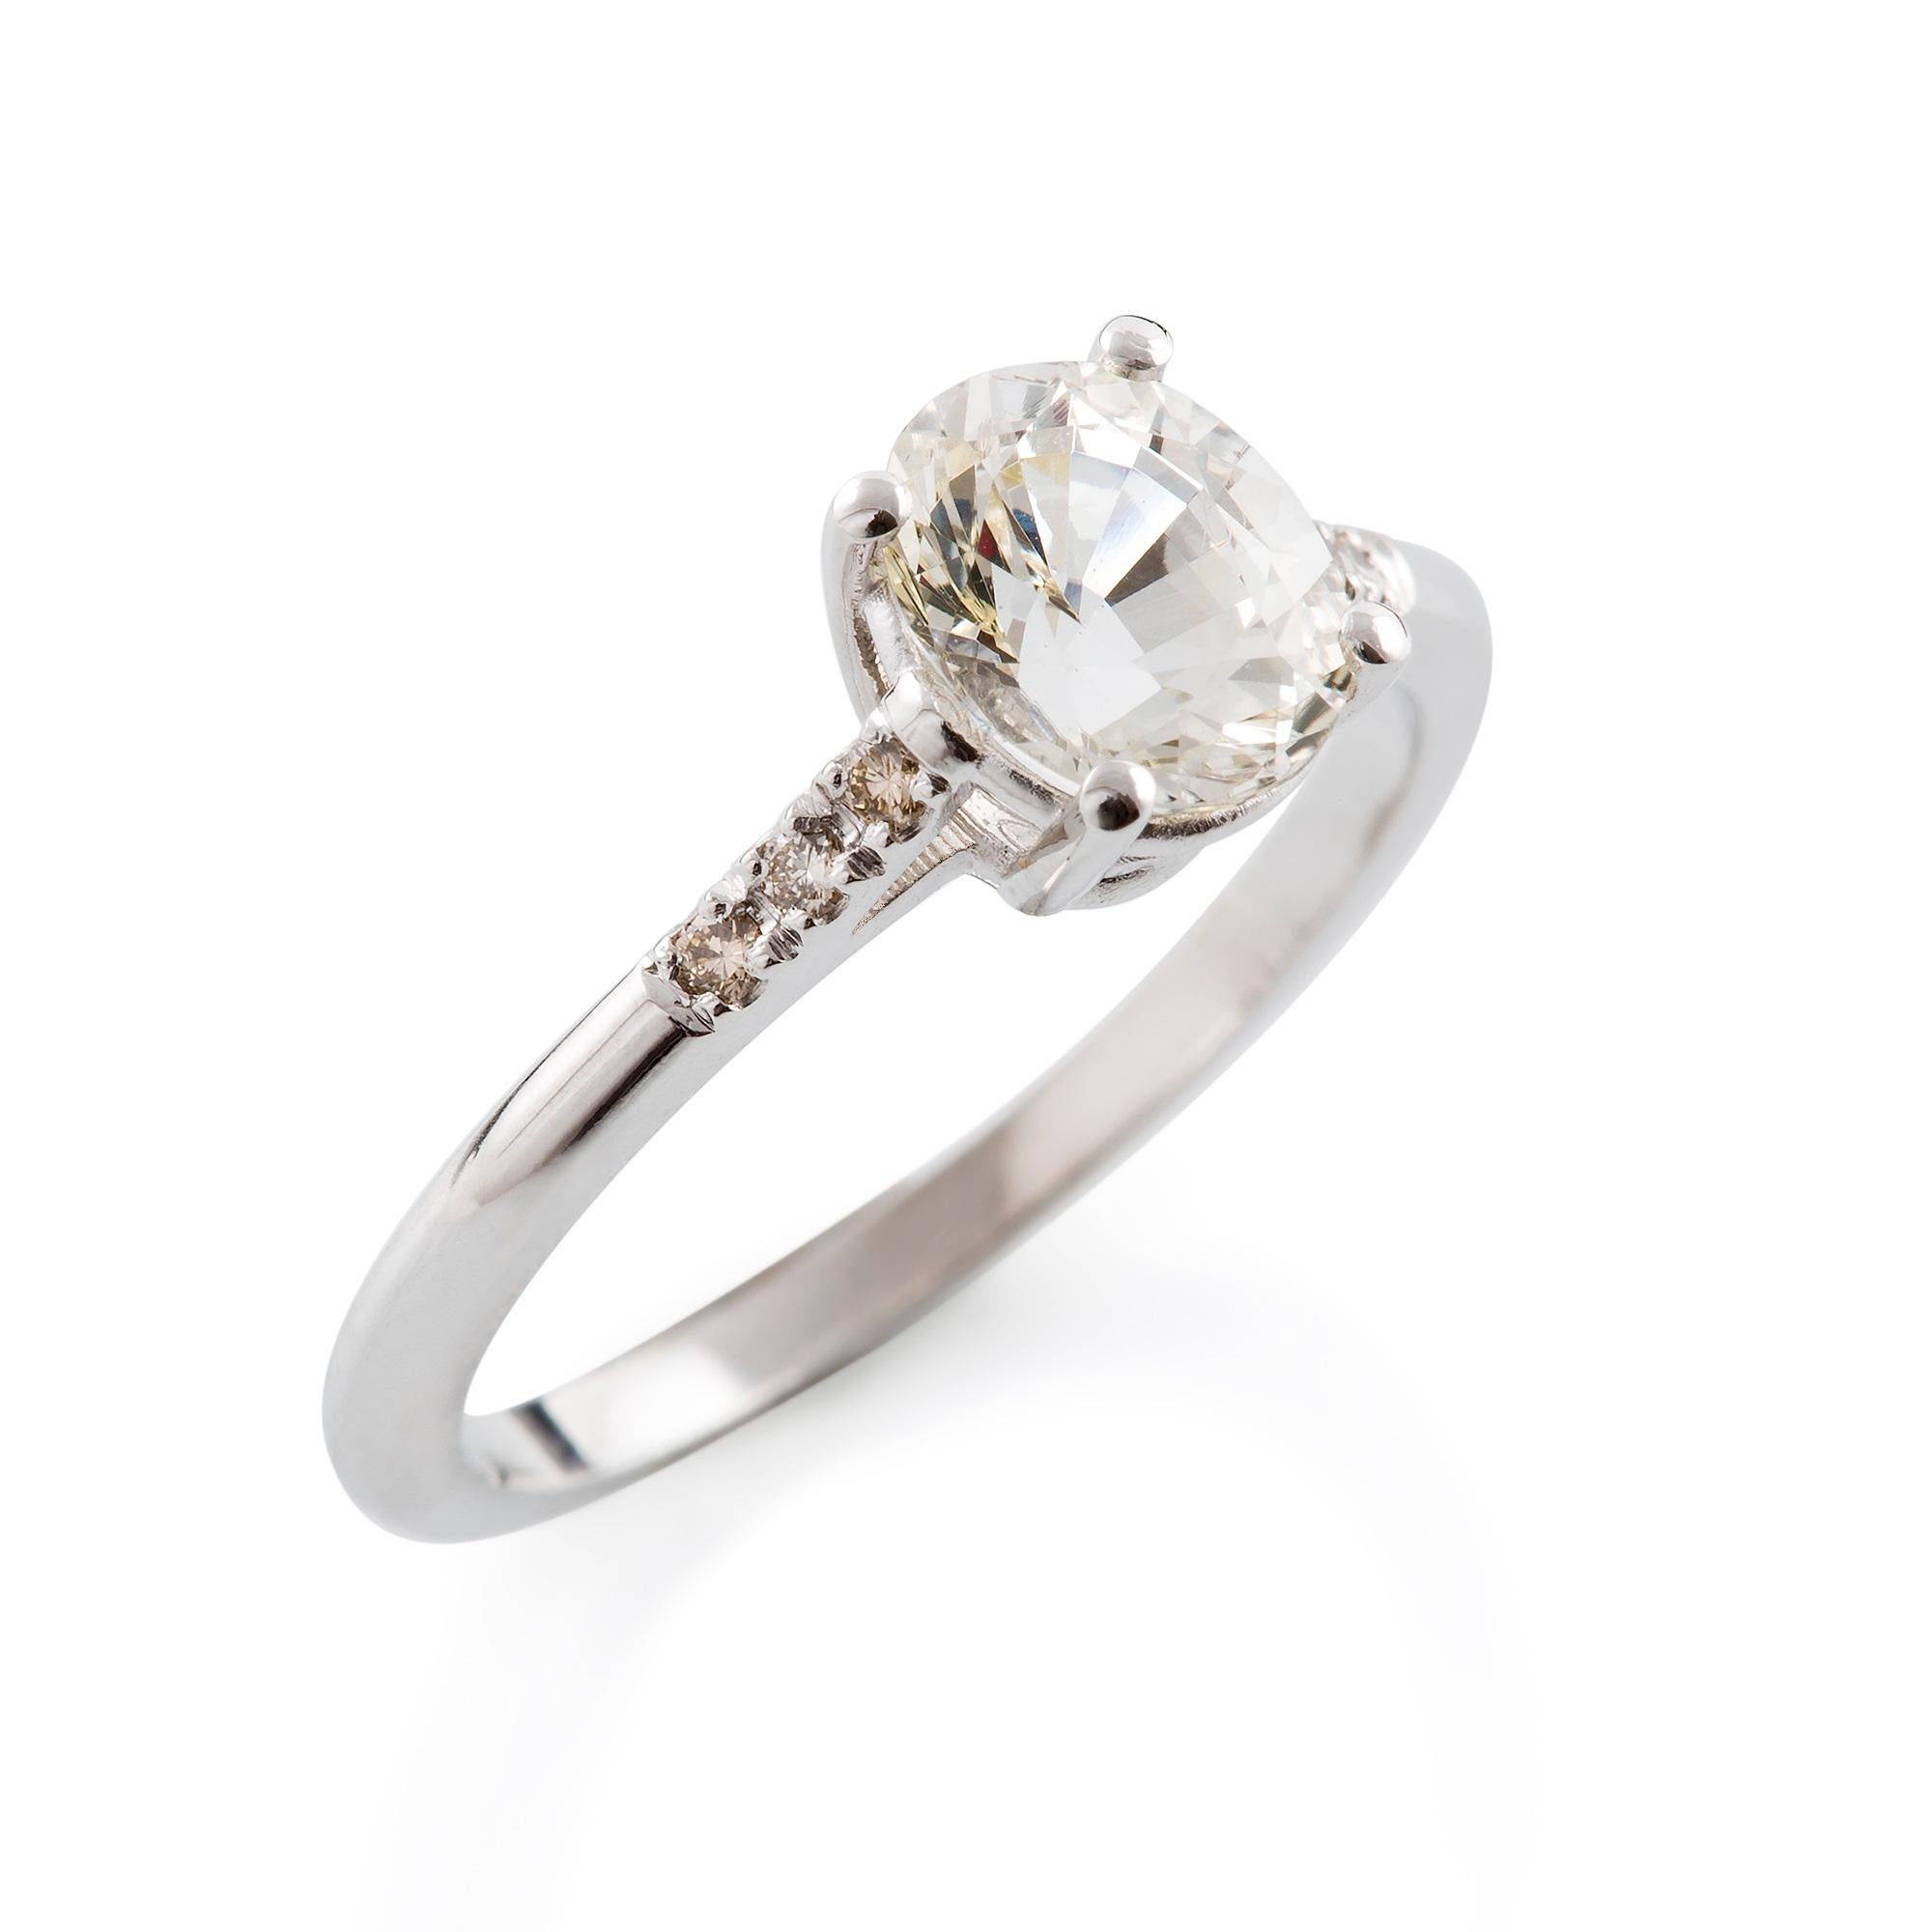 
Verde & Bianca Ring

Simply charming! This 18 carat white gold ring is set with a beautiful natural unheated oval cut white sapphire which has petite finest champagne  diamonds on either side.

Oval  faceted sapphire: White with a little tinge of